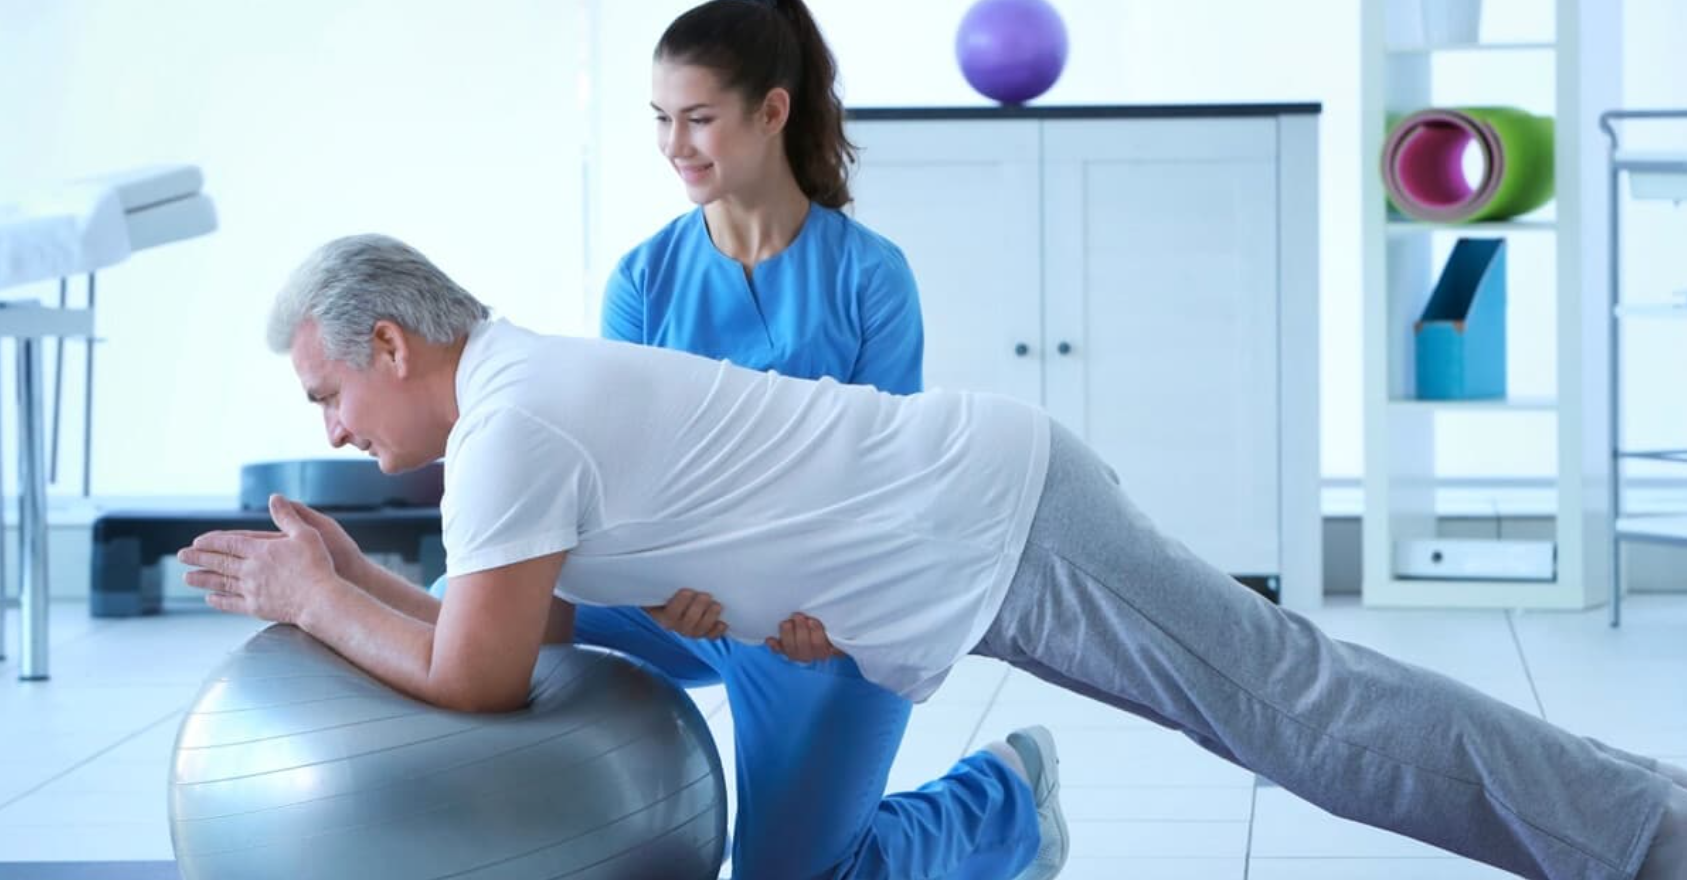 Clinical Pilates: Purpose, Benefits, Side Effects, Cost, Time to Work